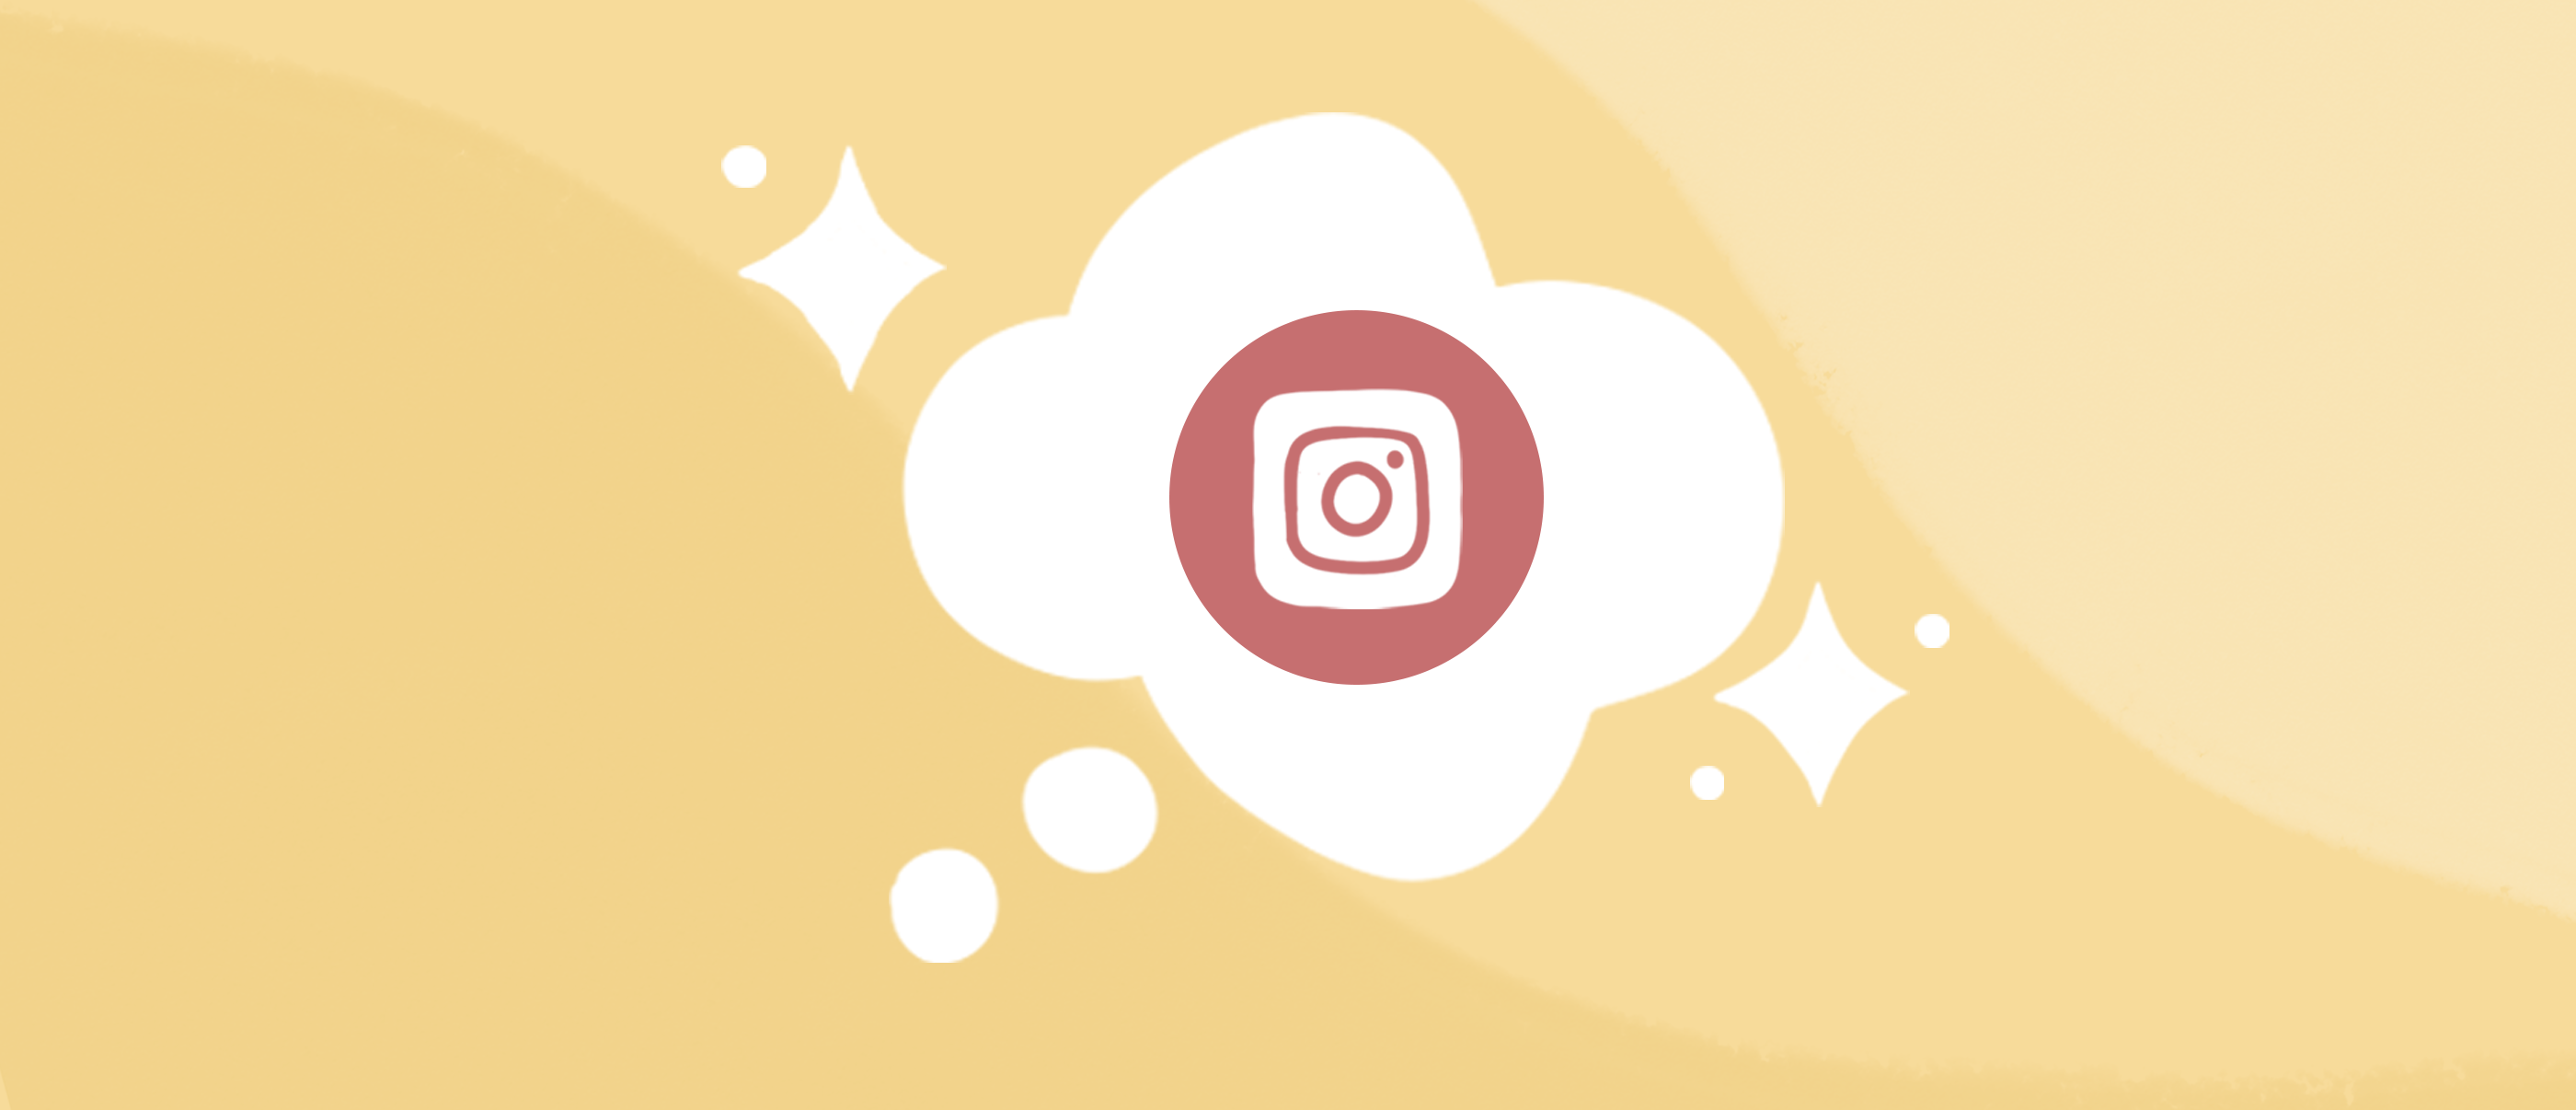 5 Instagram Tips and Best Practices for Designers in 2020, by rosee-qualls